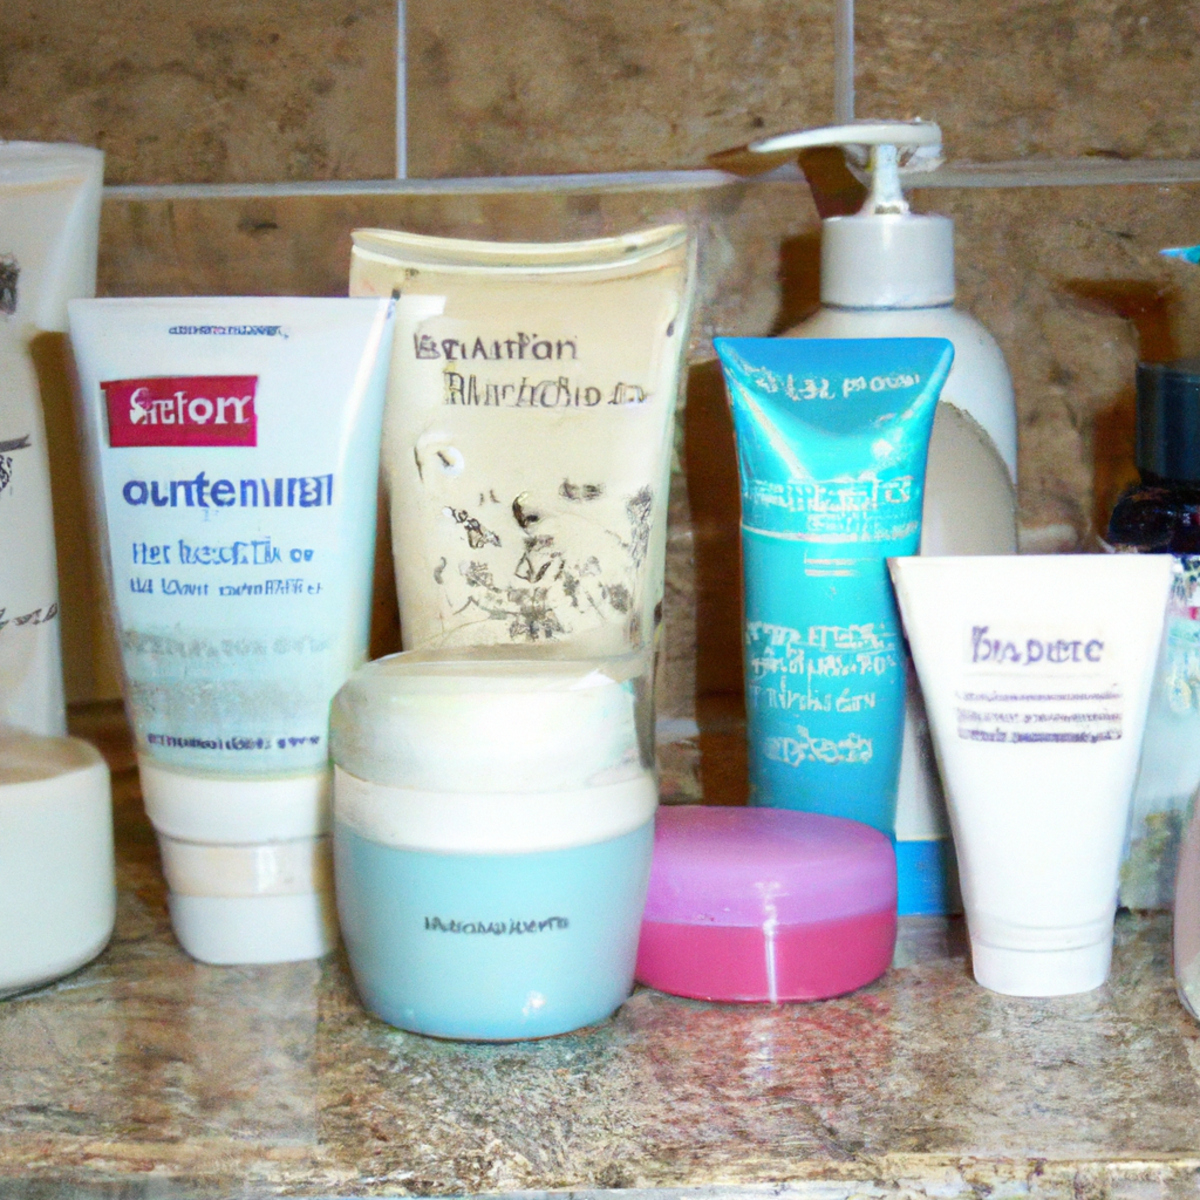 Essential skincare products for managing Harlequin Ichthyosis, neatly arranged on a bathroom countertop.